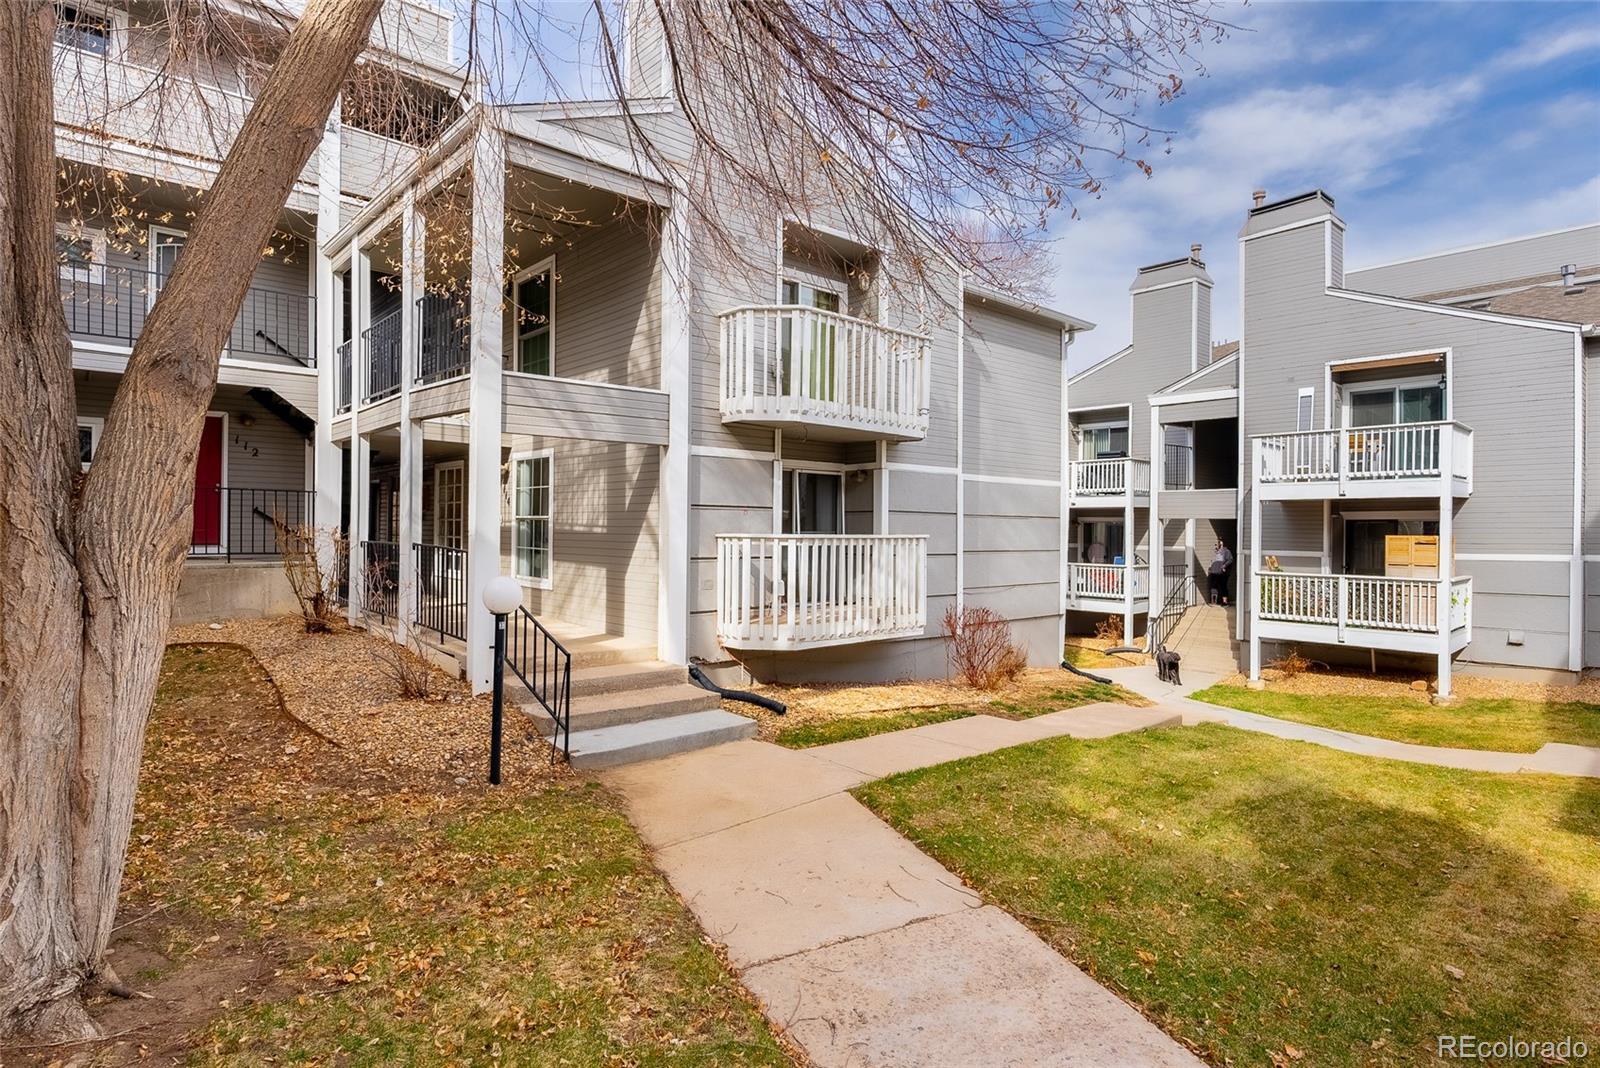 Photo one of 4450 S Pitkin St # 114 Aurora CO 80015 | MLS 7990927